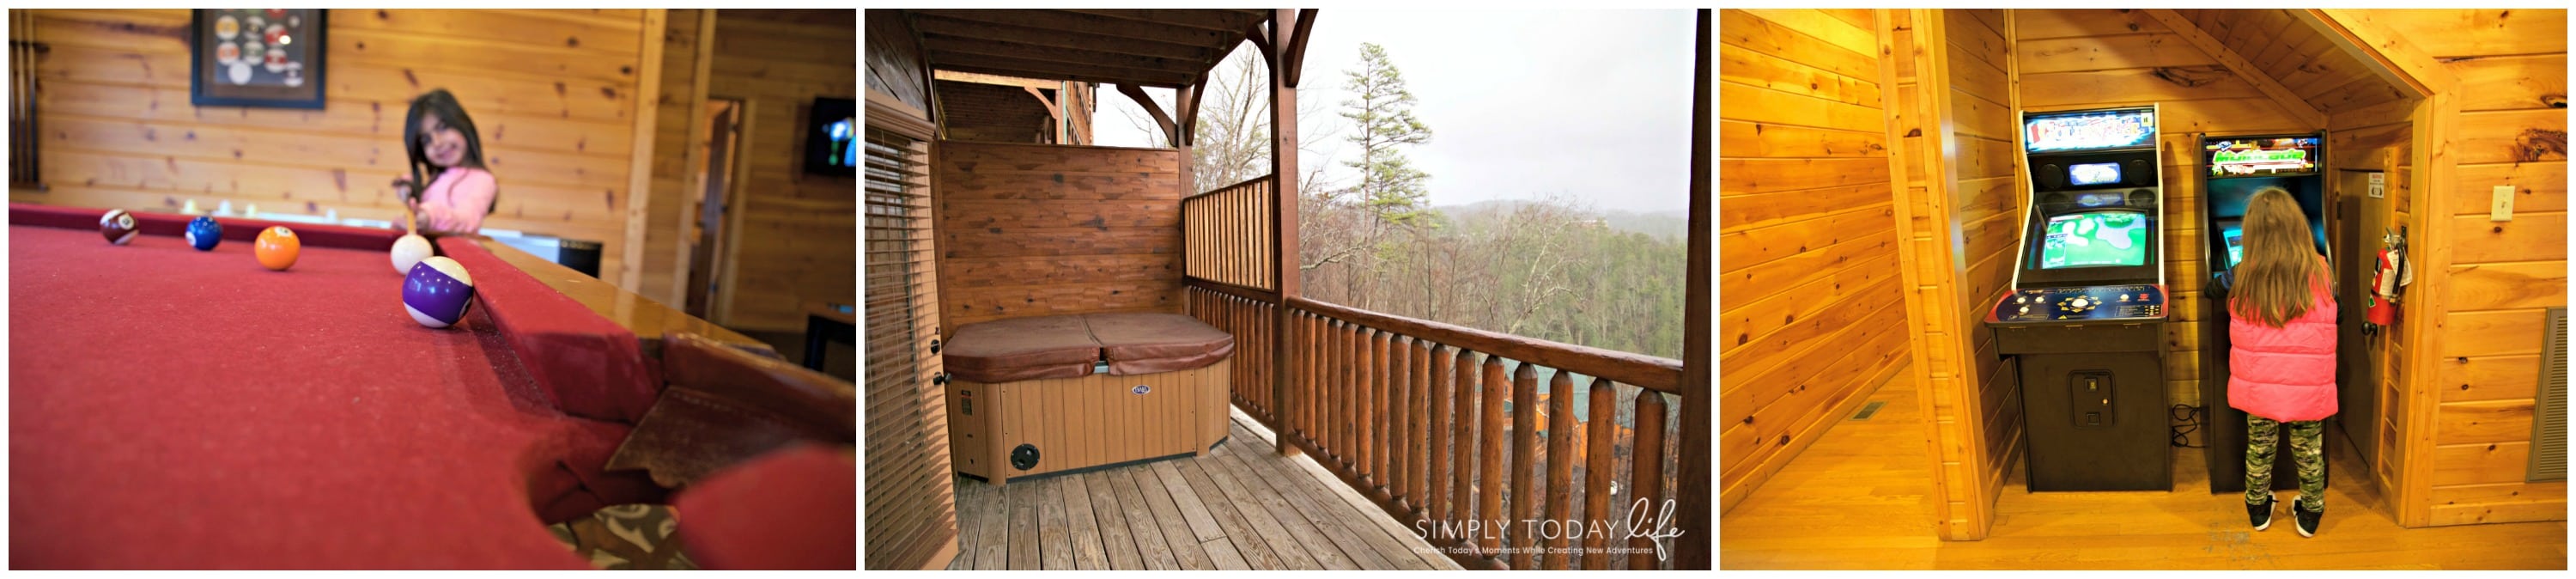 Luxury Family Cabins in Gatlinburg TN with Two Stories - simplytodaylife.com